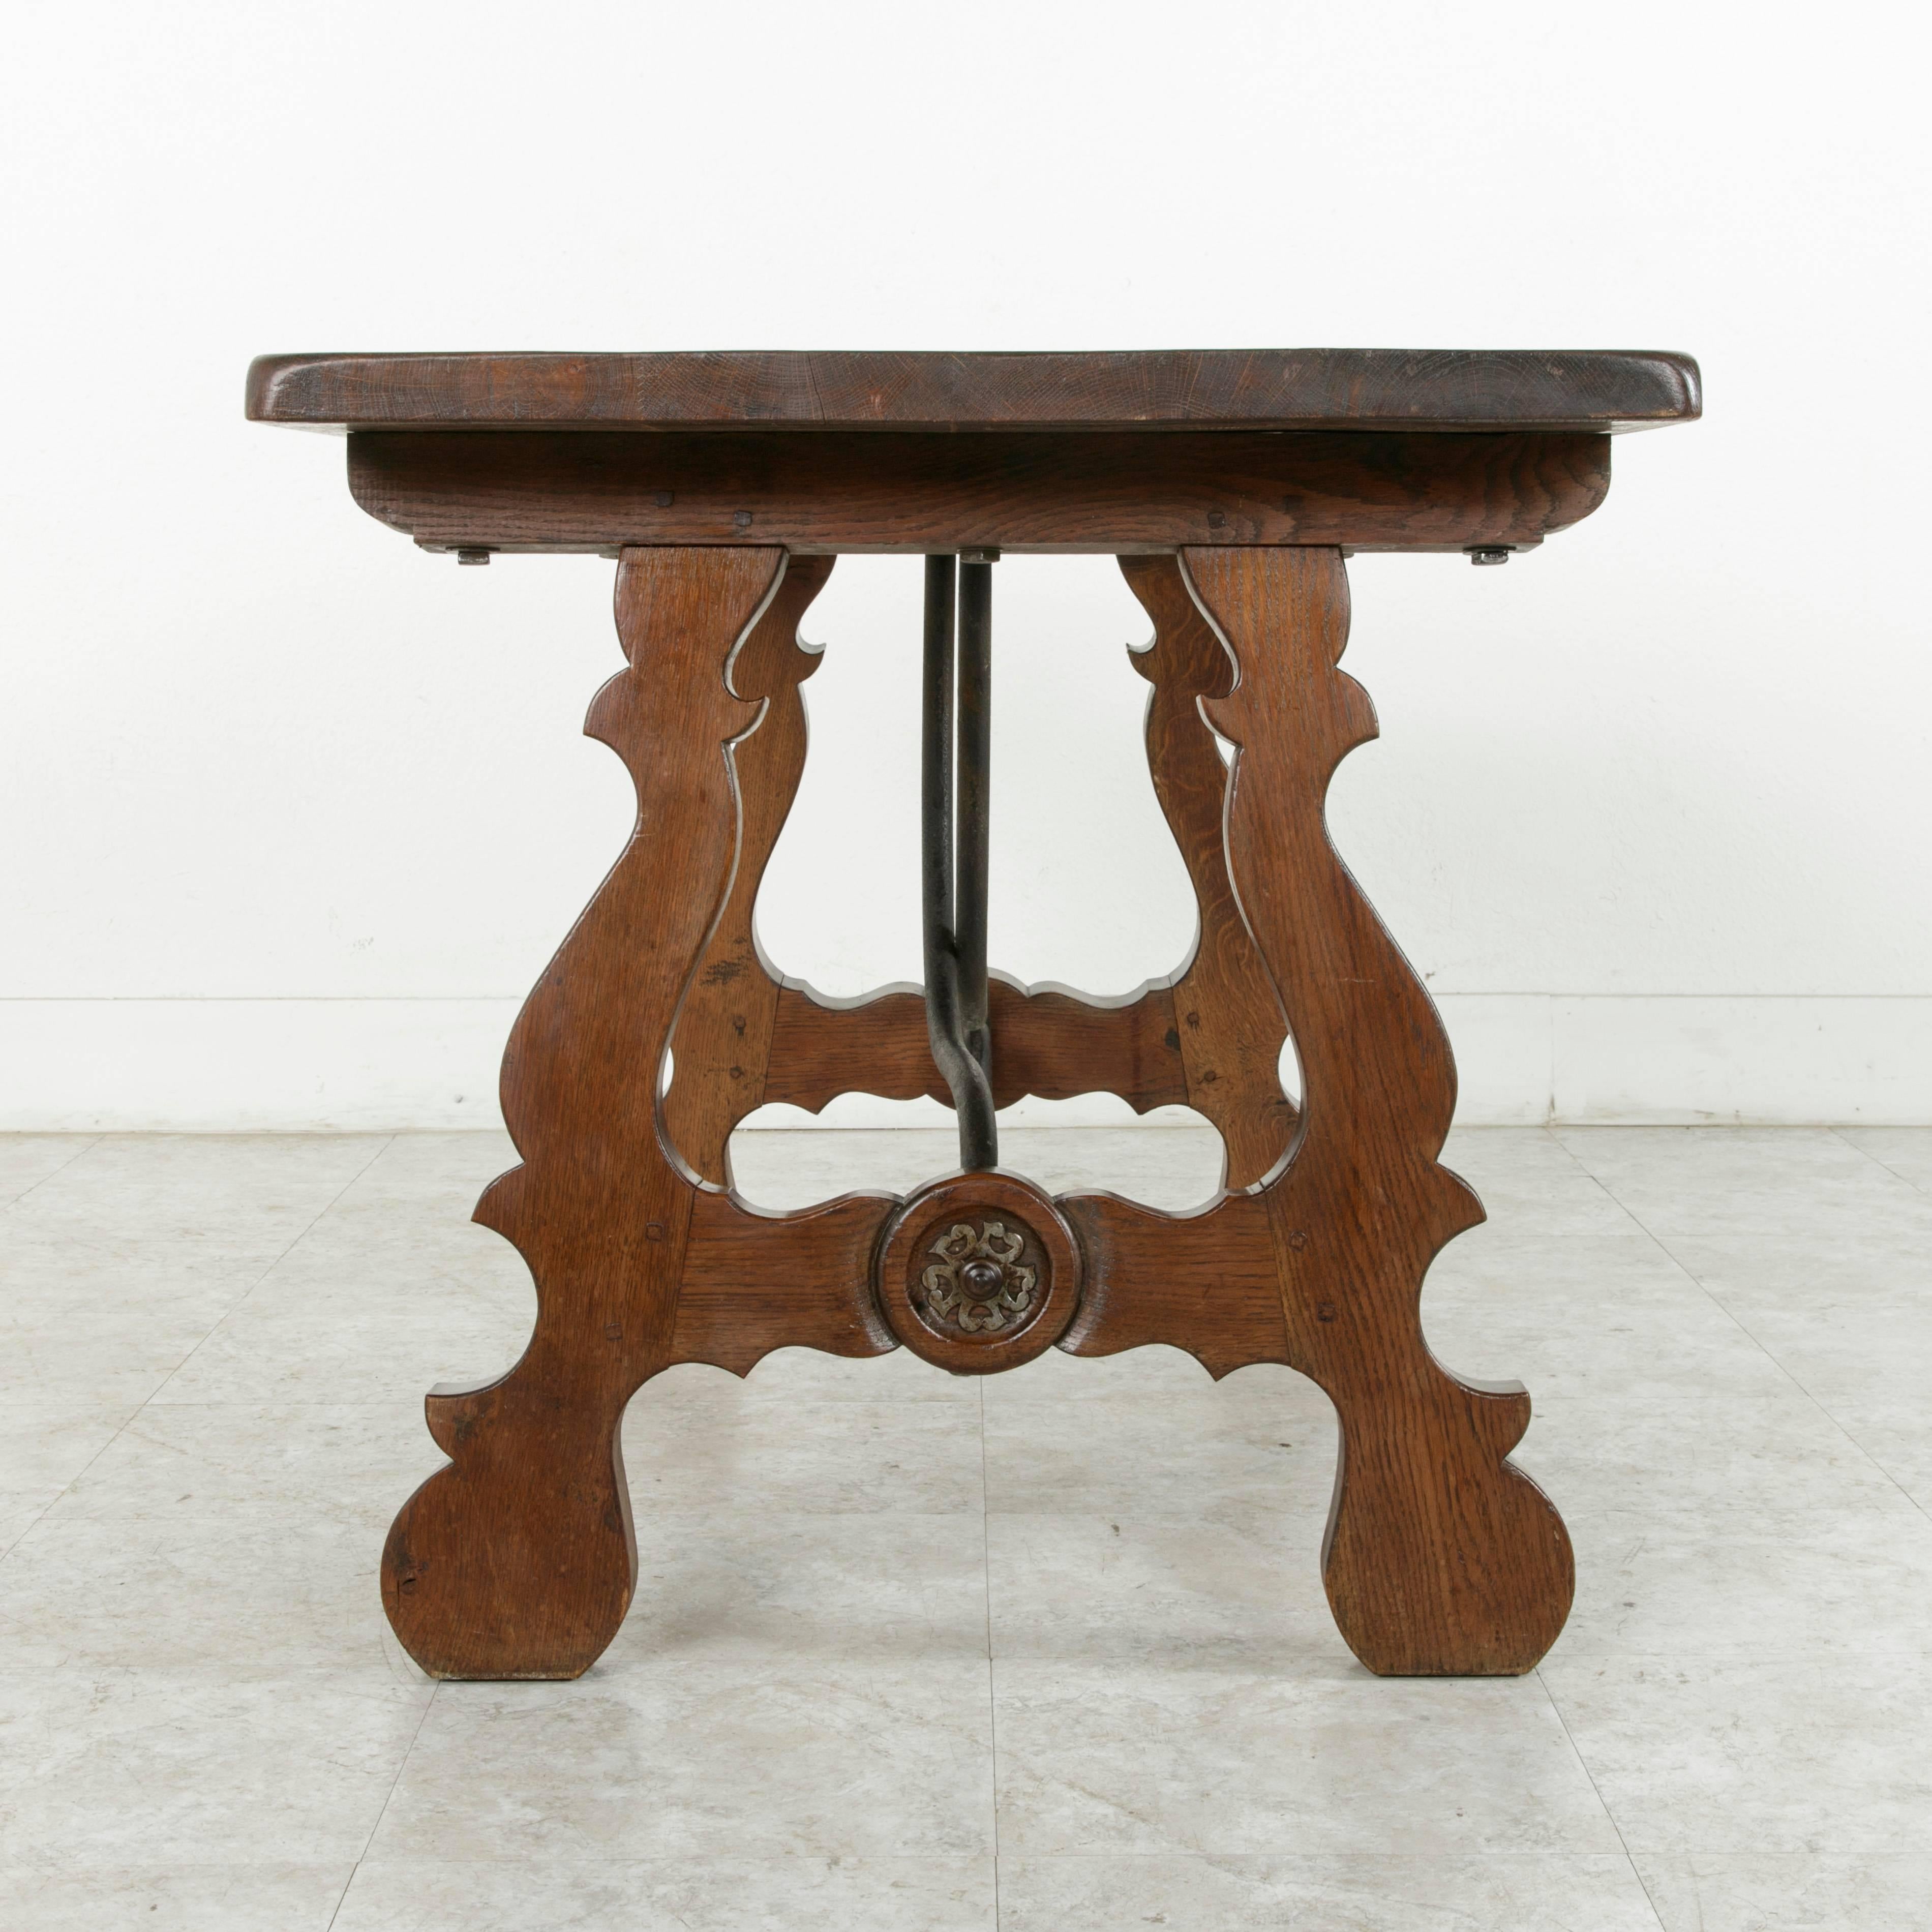 Wrought Iron Early 20th Century Spanish Renaissance Style Table or Desk with Iron Stretcher